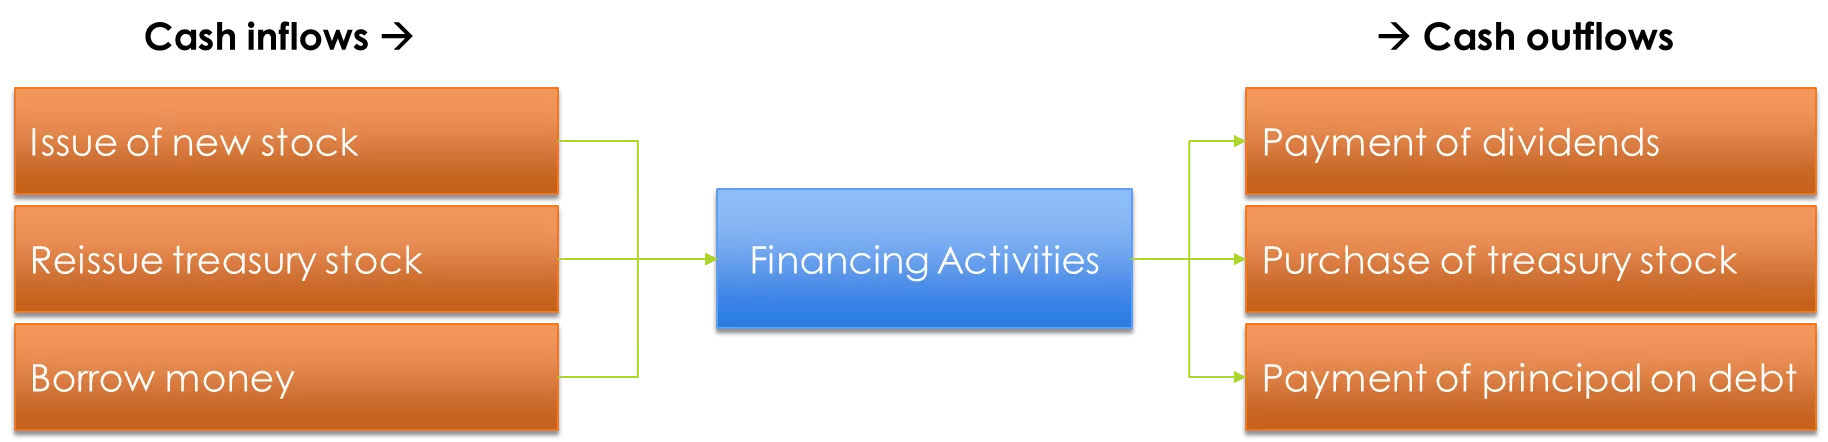 Cash Flows from Financing Activities